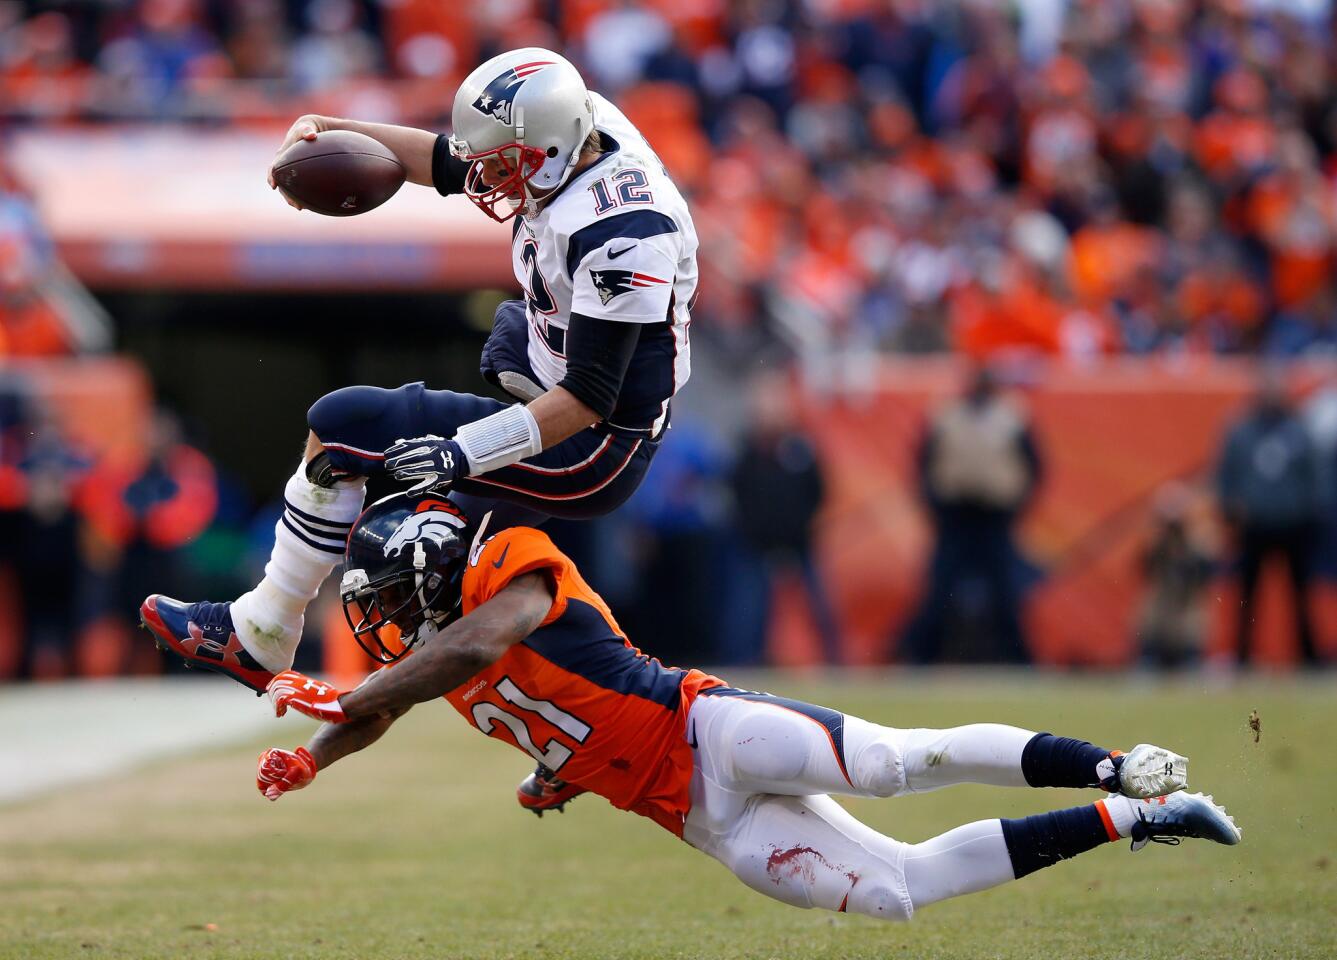 Patriots quarterback Tom Brady is upended by Broncos cornerback Aqib Talib after scrambling for an 11-yard gain during the second quarter of the AFC Championship game on Jan. 24.